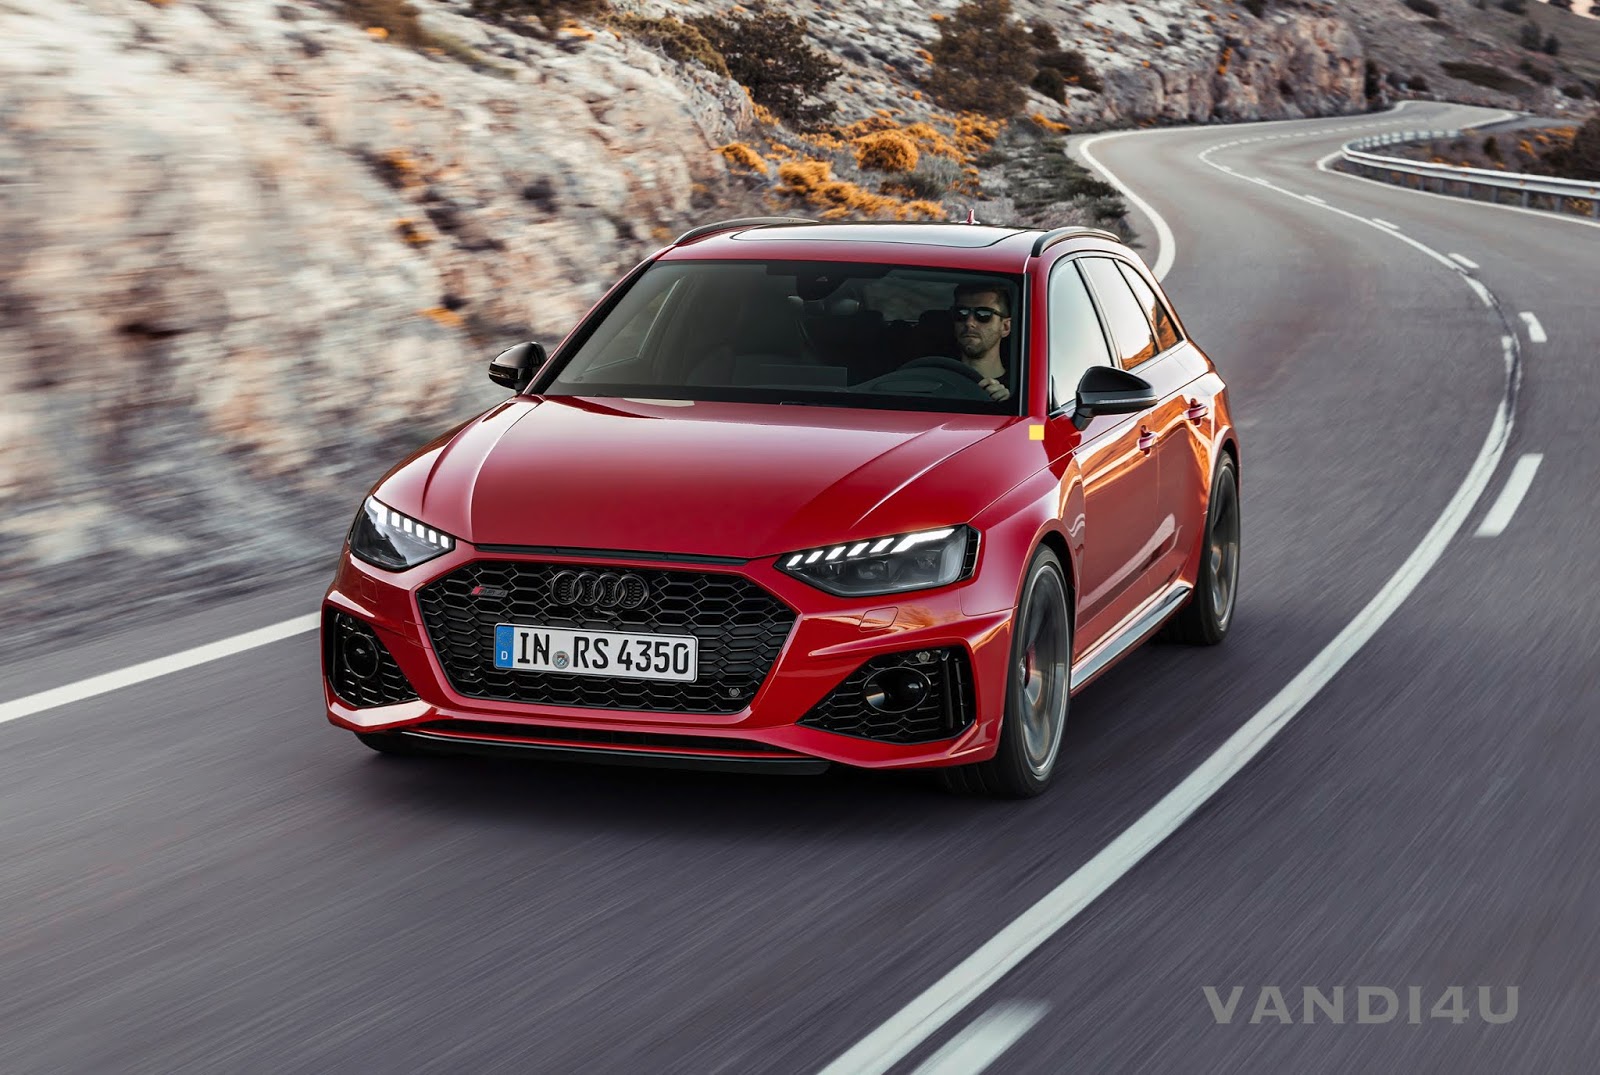 2020 Audi Rs4 Revealed Top 5 Things To Know